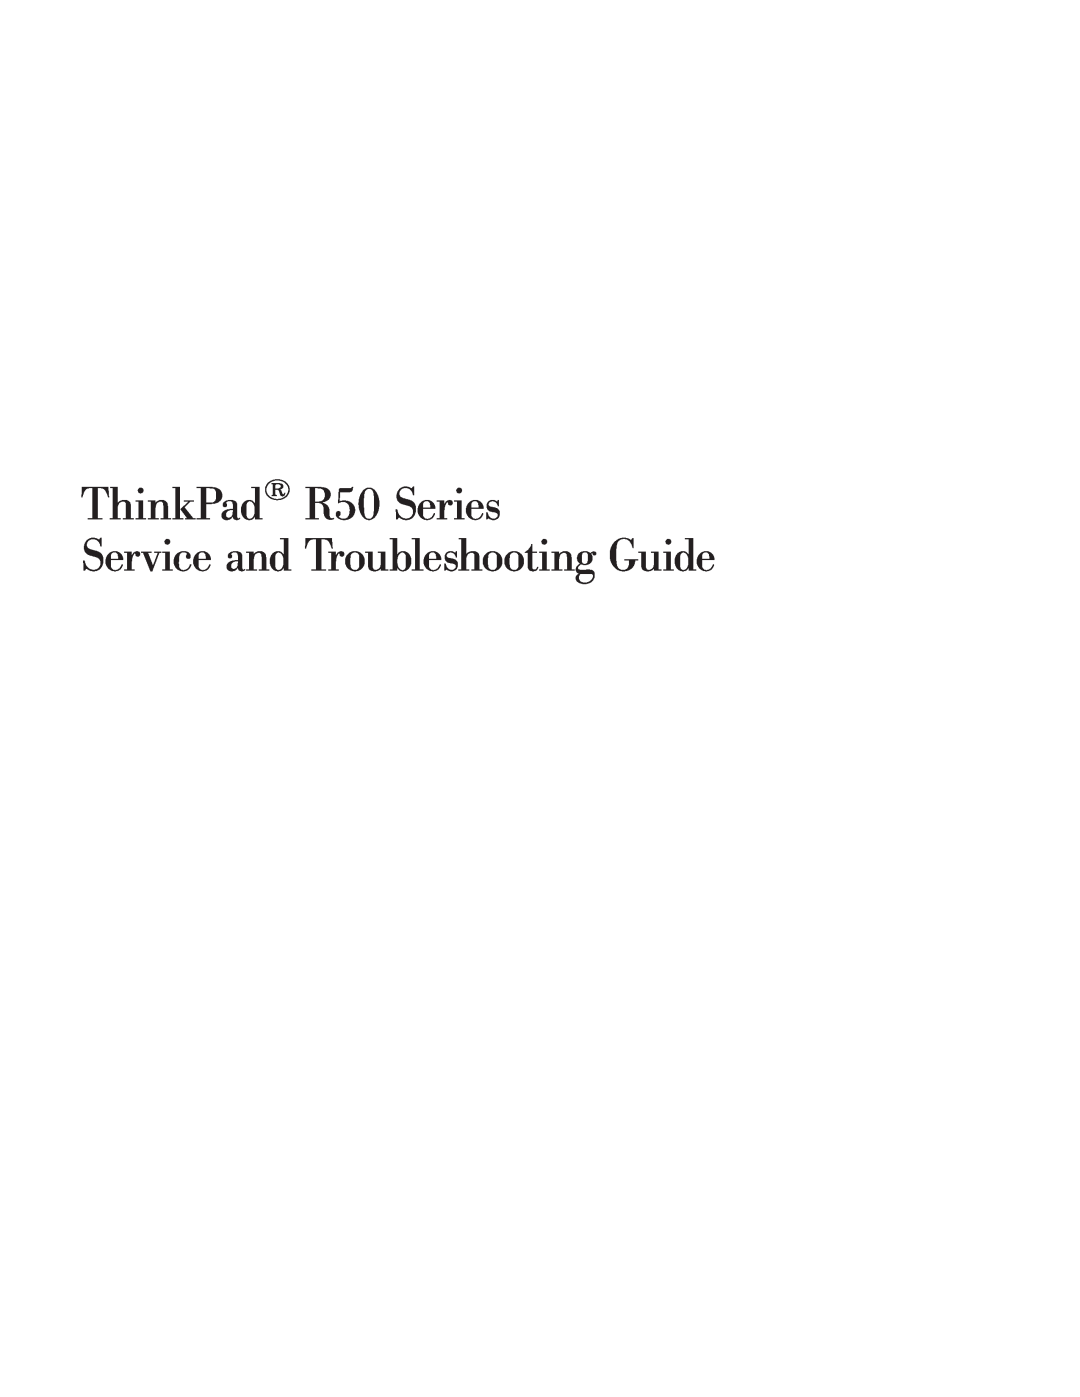 Lenovo manual ThinkPad R50 Series, Service and Troubleshooting Guide 